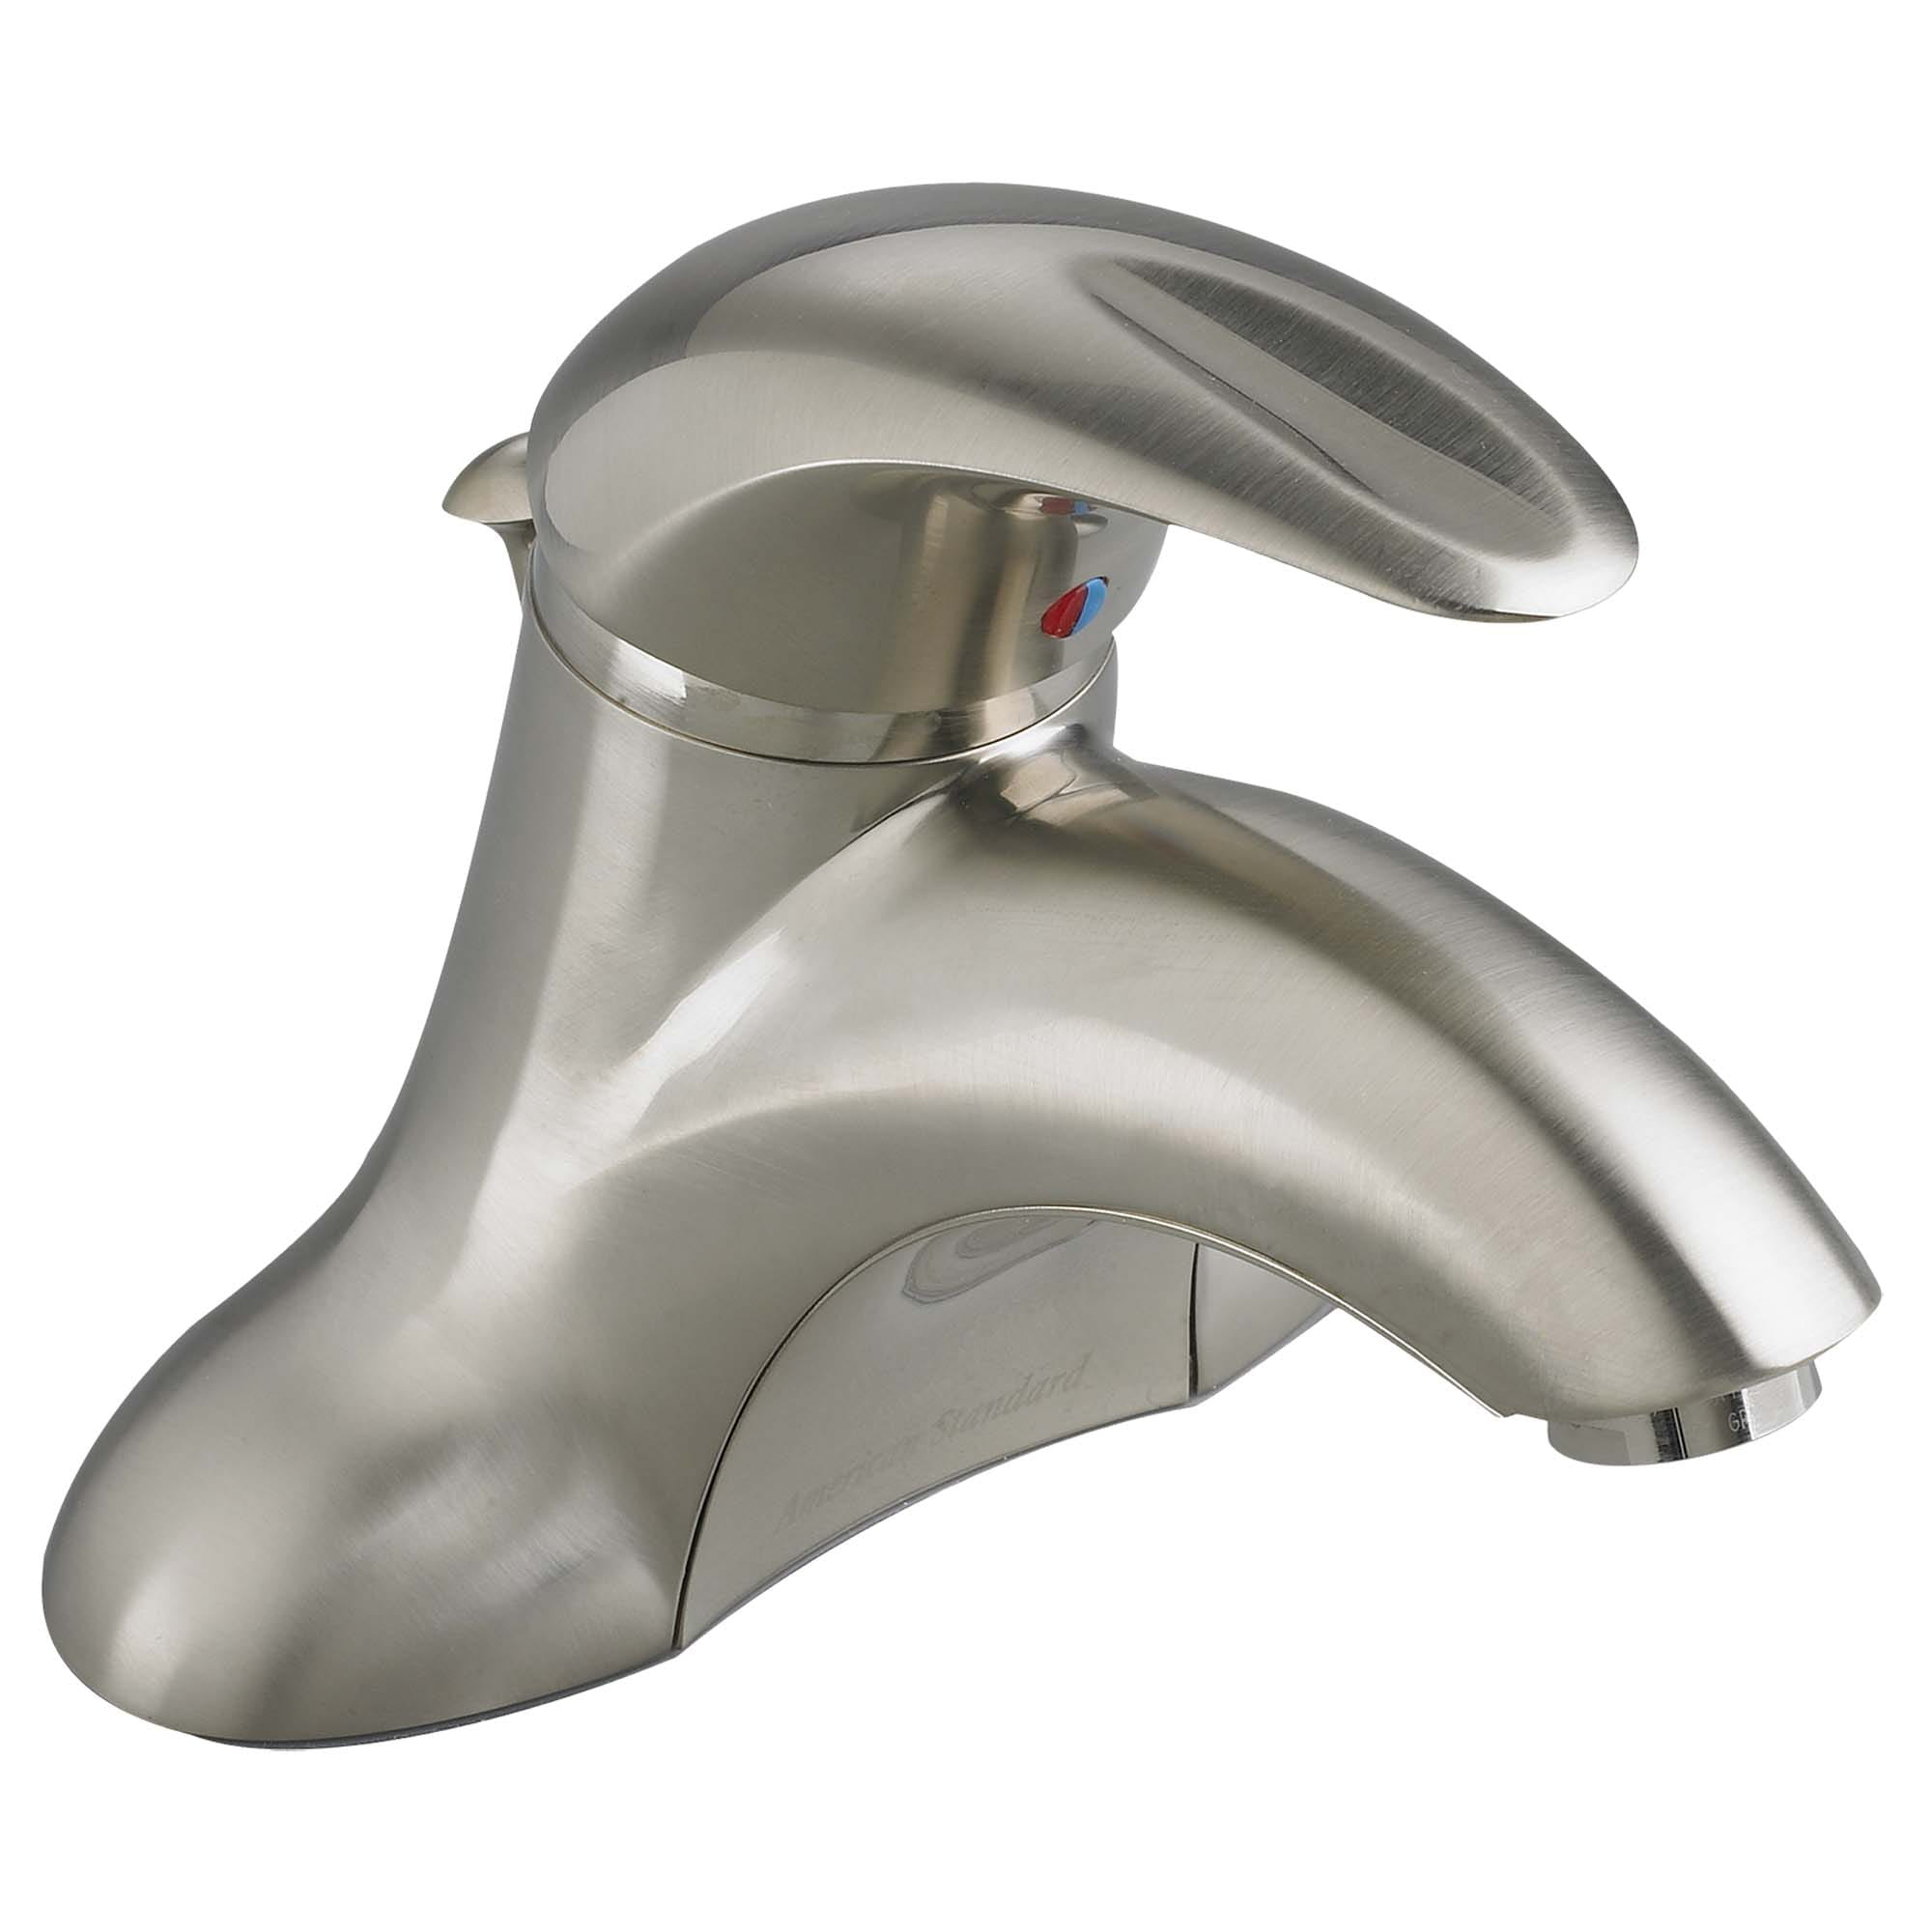 Reliant 3® 4-Inch Centerset Single-Handle Bathroom Faucet 1.2 gpm/4.5 L/min With Lever Handle